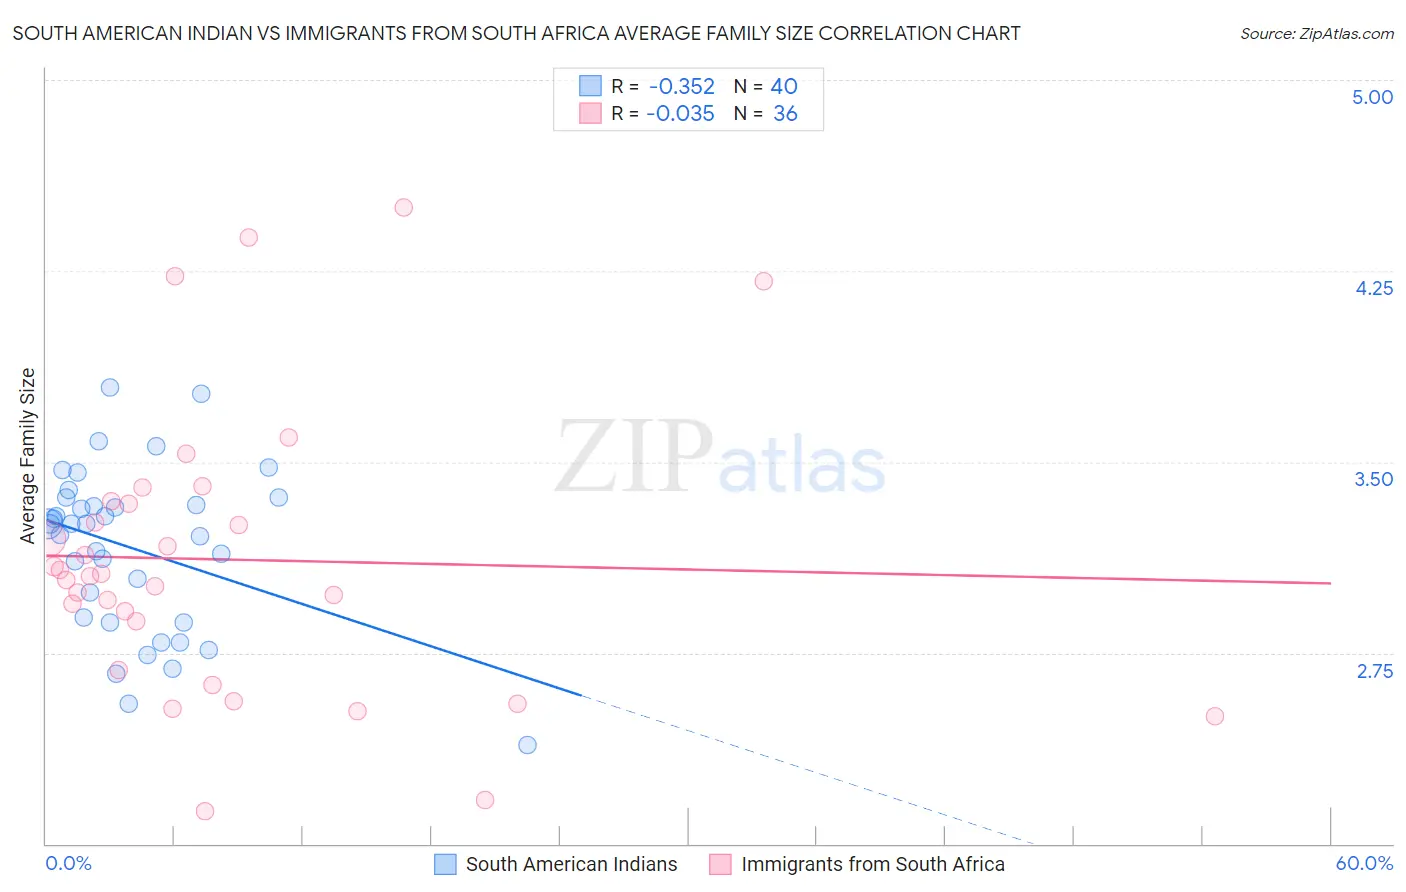 South American Indian vs Immigrants from South Africa Average Family Size